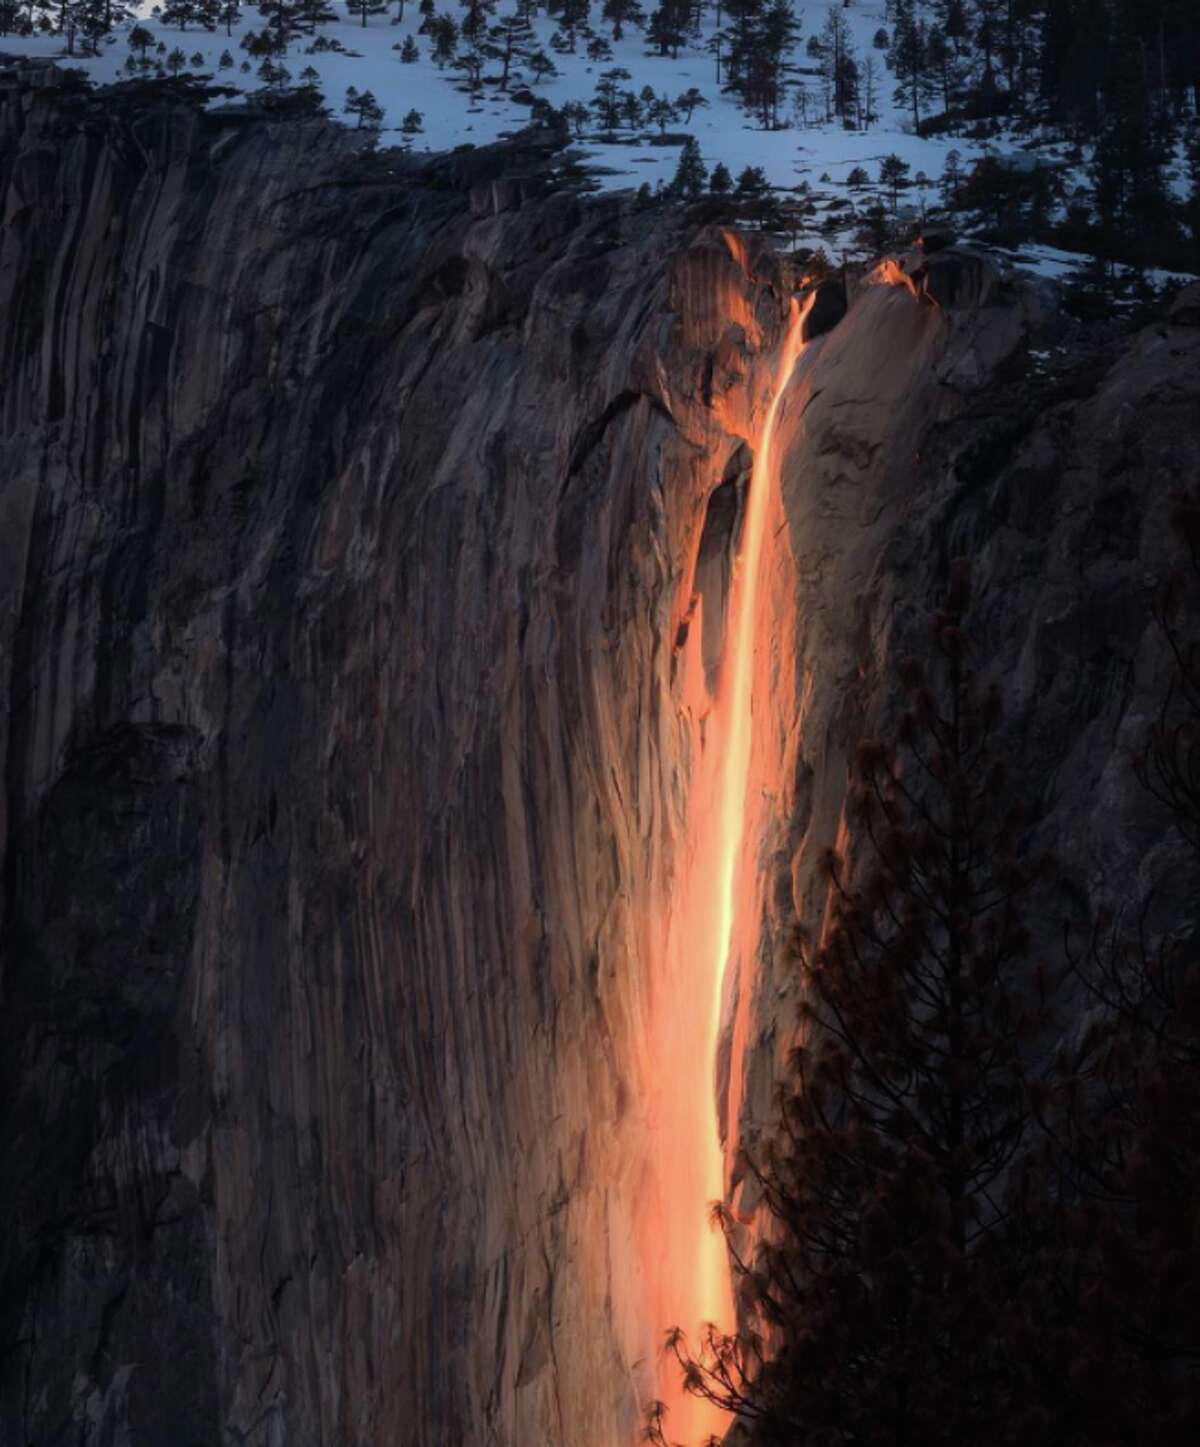 With only a trickle of water, Yosemite's 'firefall' still puts on show